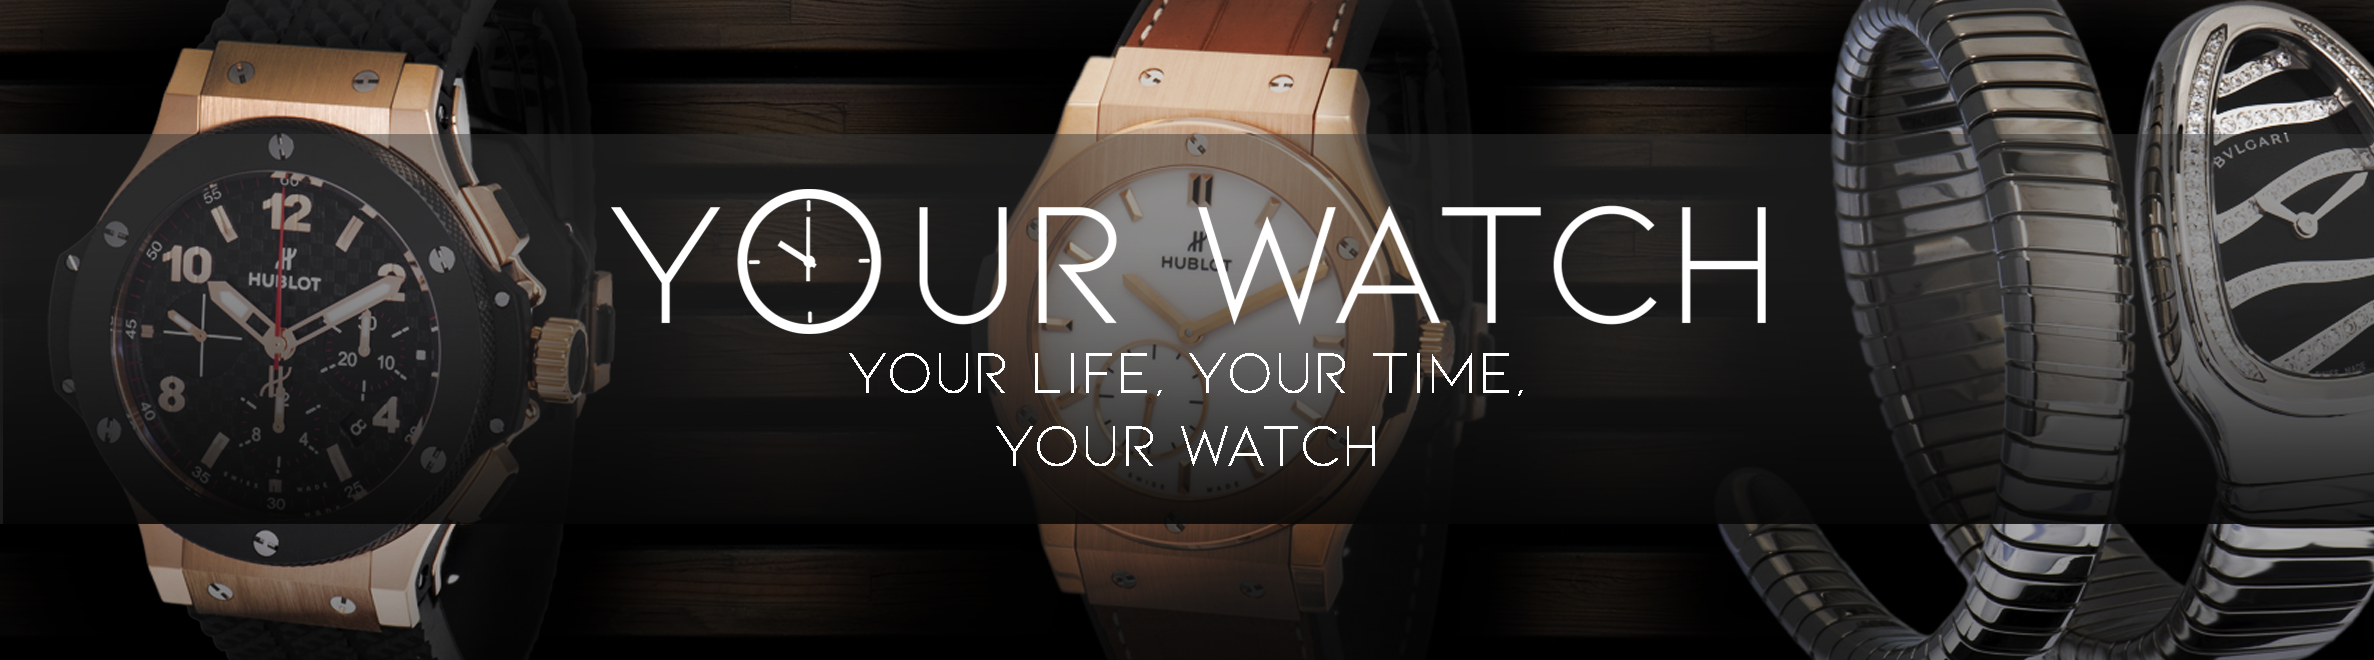 YourWatch.com, Wednesday, March 20, 2019, Press release picture